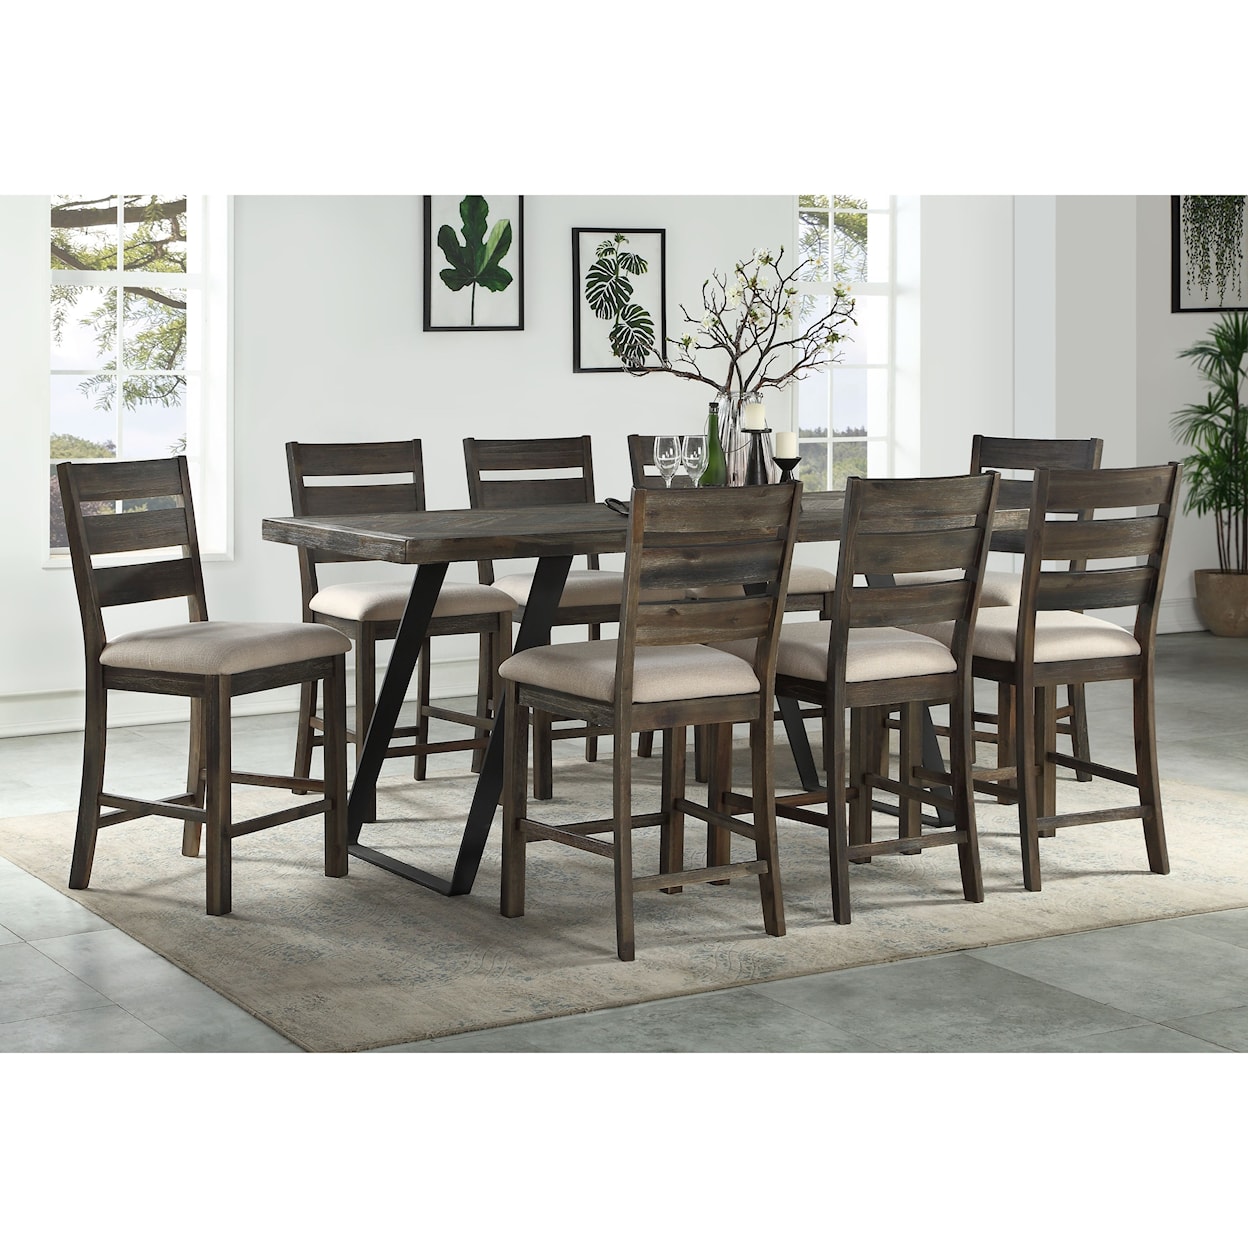 Coast2Coast Home Aspen Court 9-Piece Counter Height Table and Chair Set